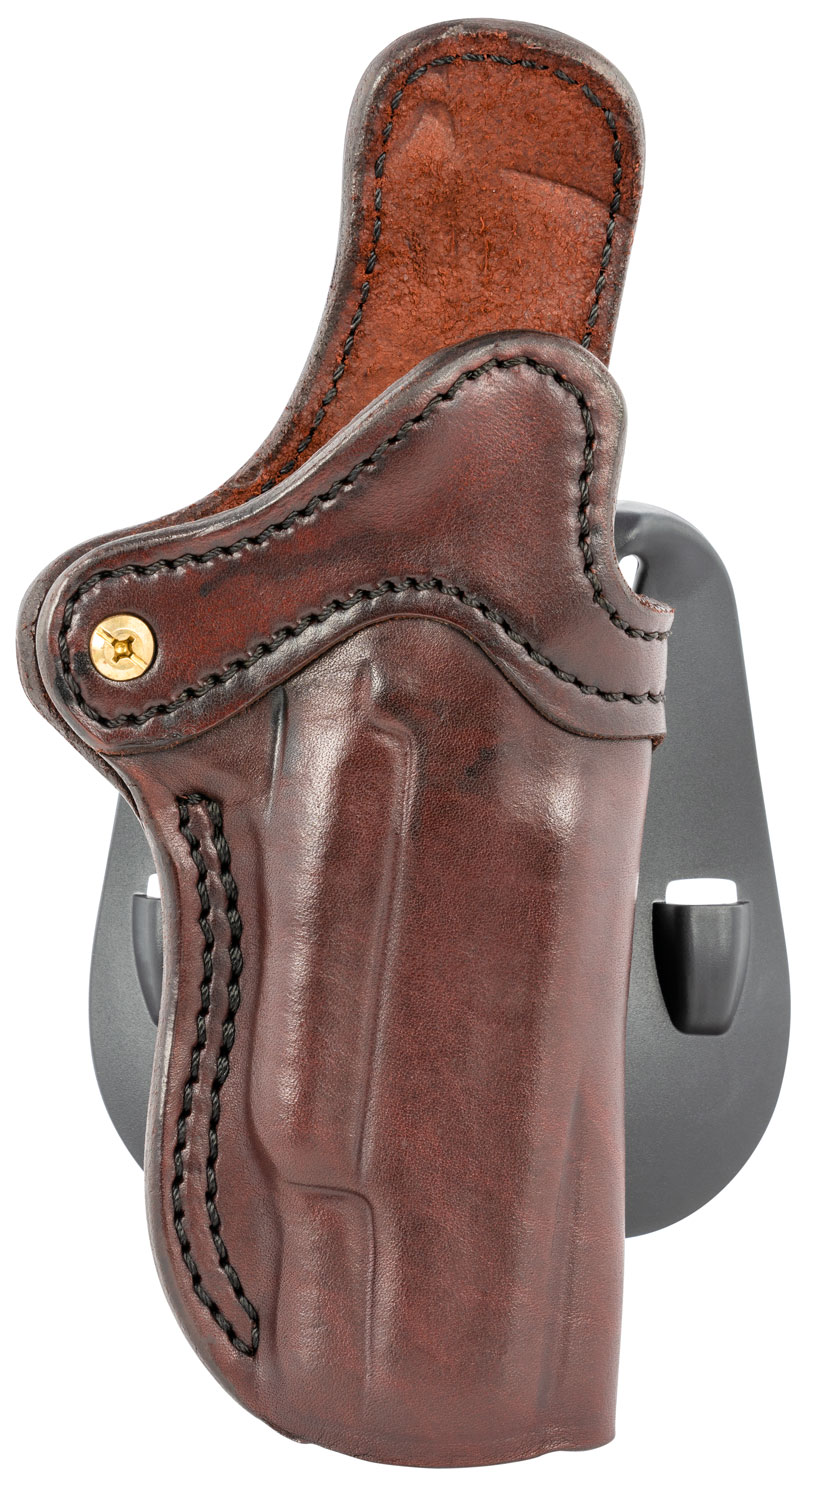 1791 Gunleather ORPDH1SBRR BH1 Optic Ready Size 01 OWB Style made of Leather with Signature Brown Finish, Adjustable Cant & Paddle Mount Type fits 4-5